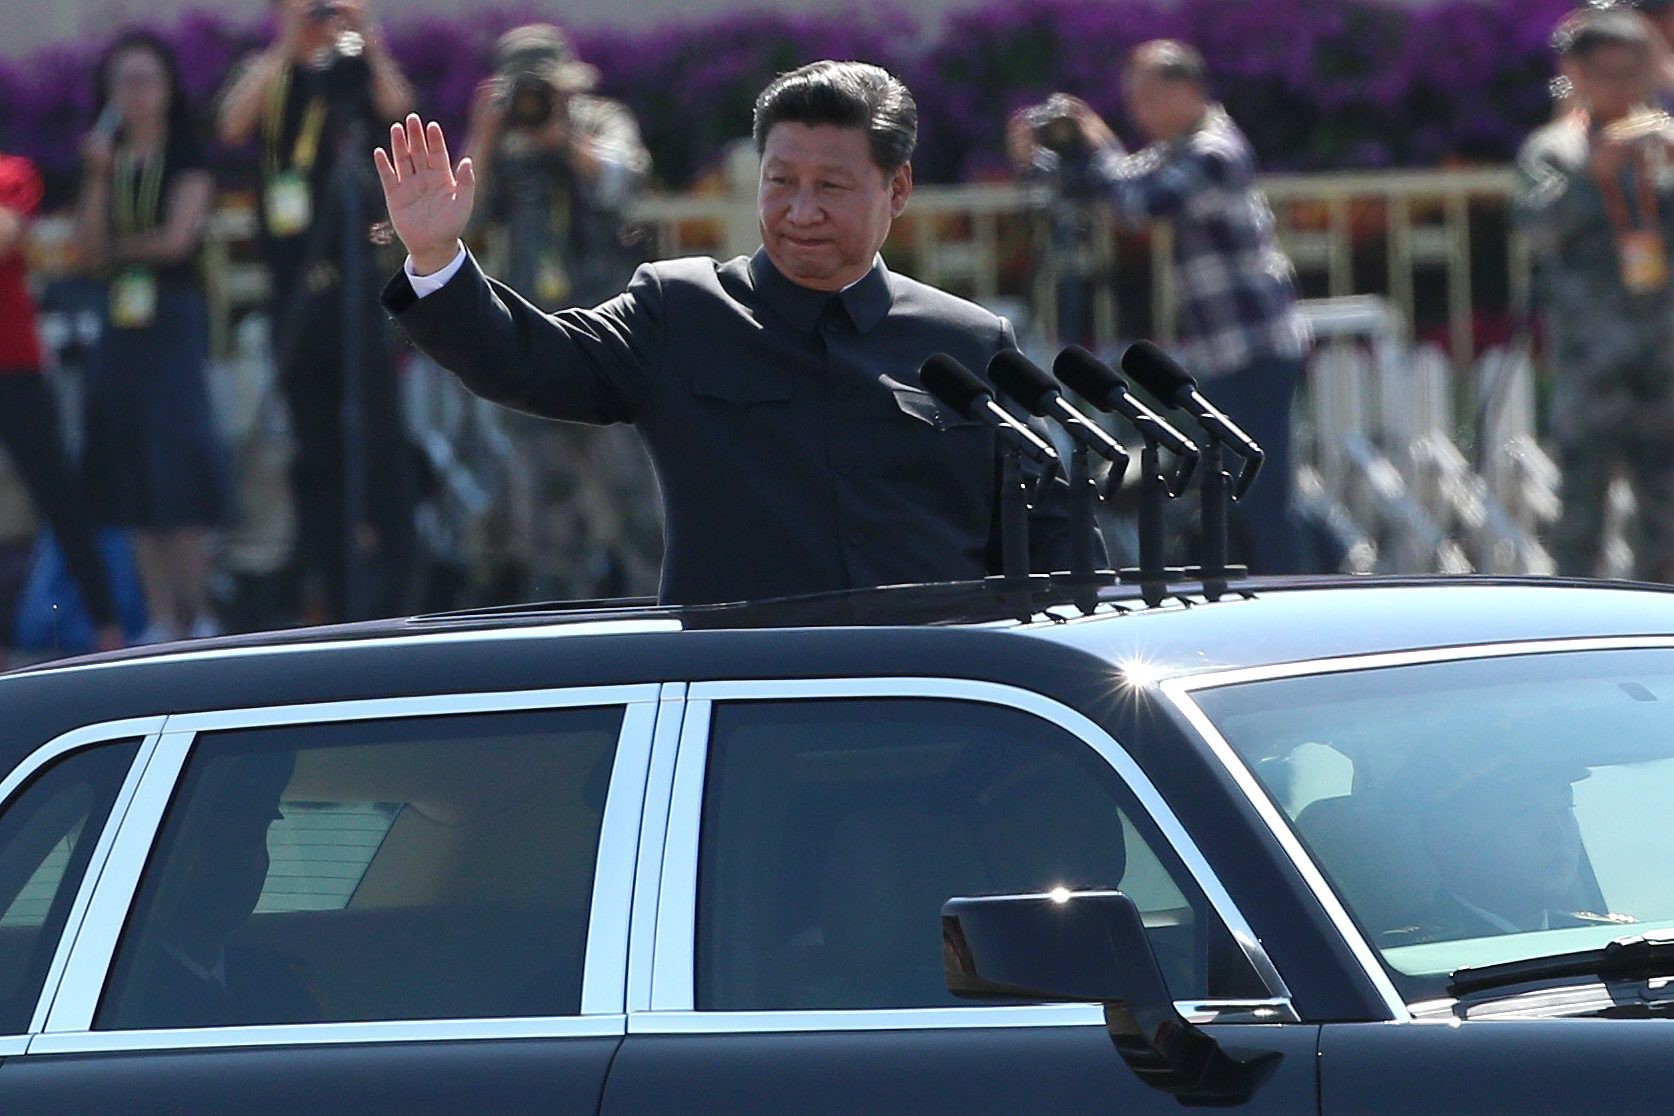 President Xi Jinping waves as he reviews troops on Tiananmen Square during a Victory Day military parade in September 2015. He has signed two amnesty orders since taking office, one to mark the 70th anniversary of the end of the second world war in 2015, and the other to celebrate the 70th anniversary of the founding of the People’s Republic China this year. Photo: EPA